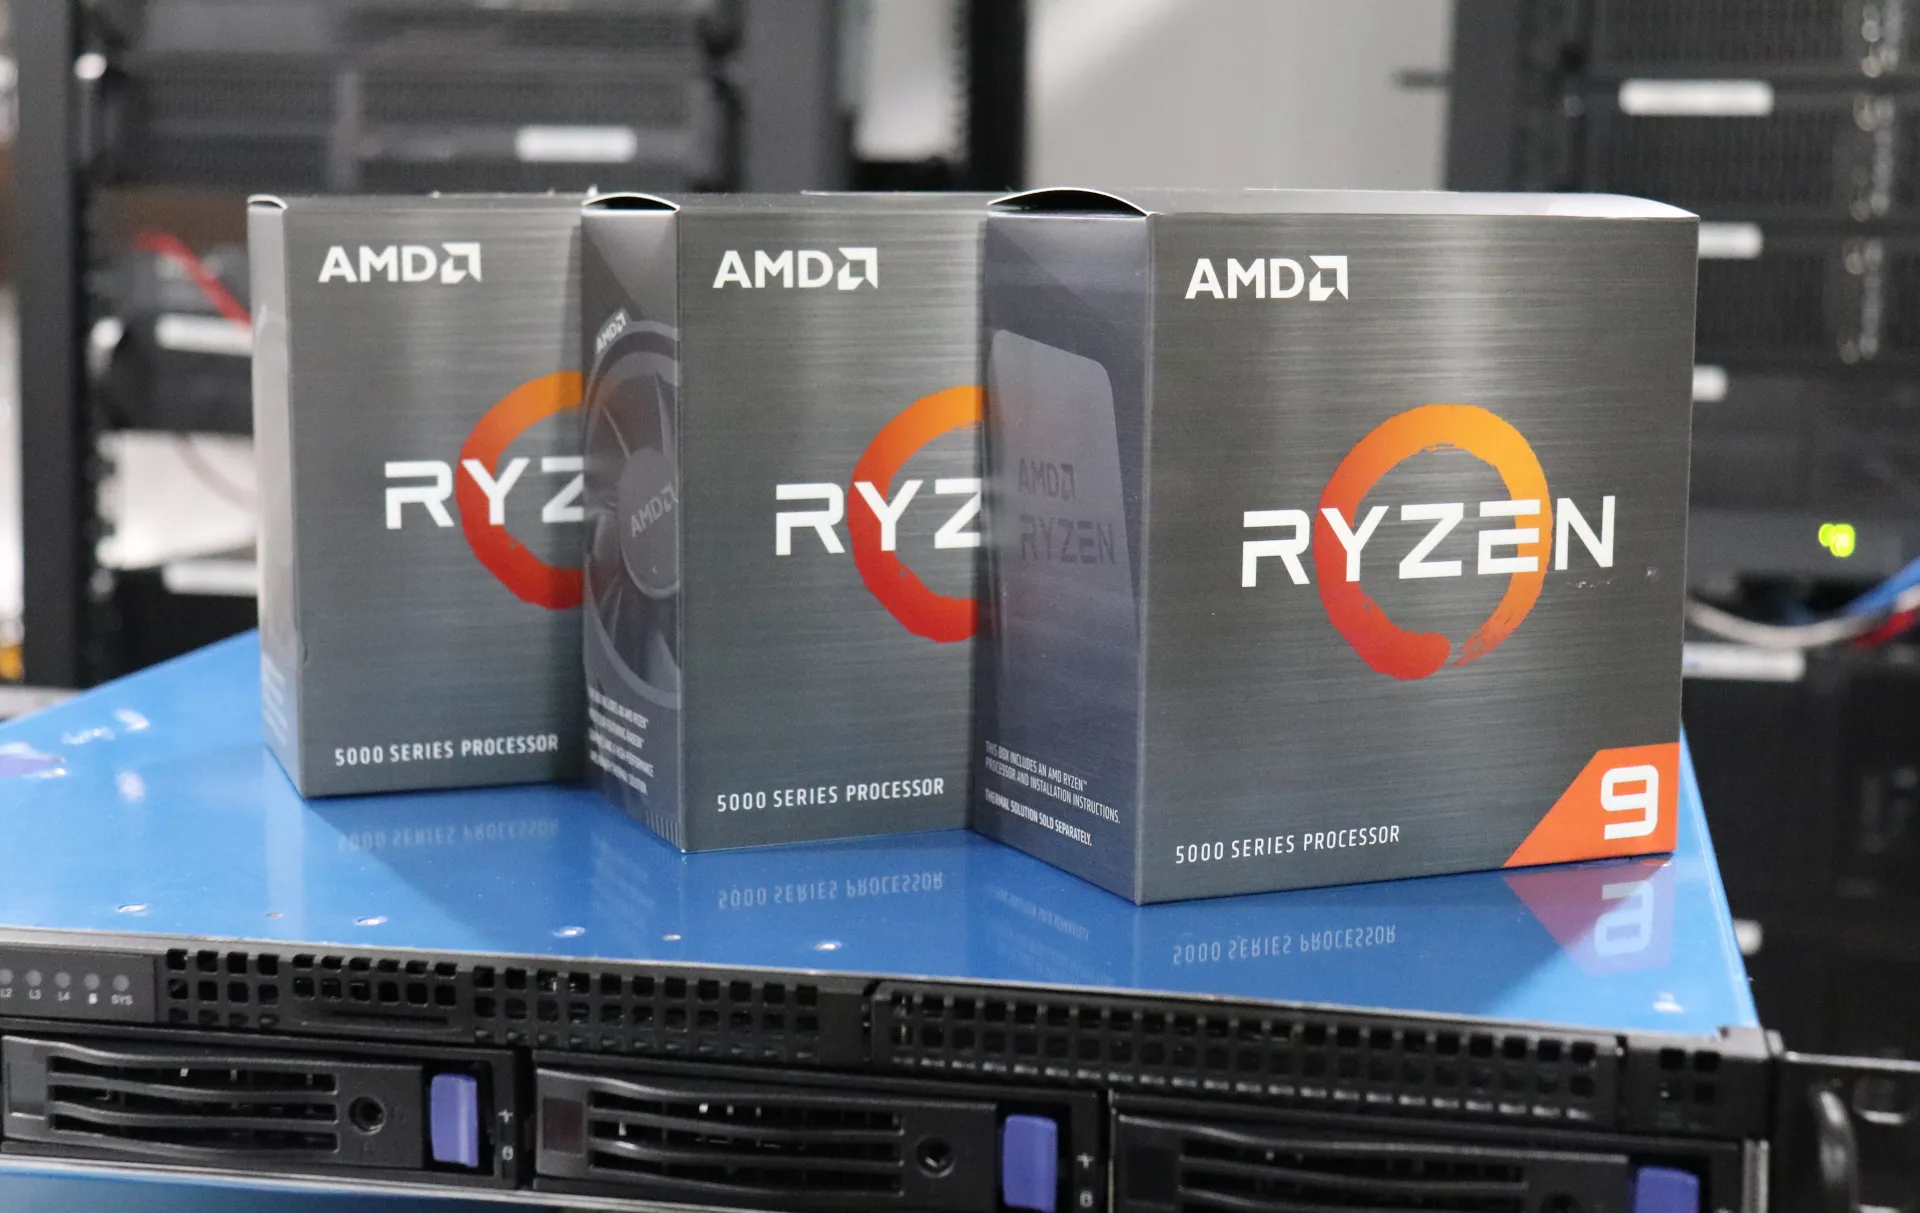 Dedicated servers with a AMD Ryzen 9 5950X CPU in the USA